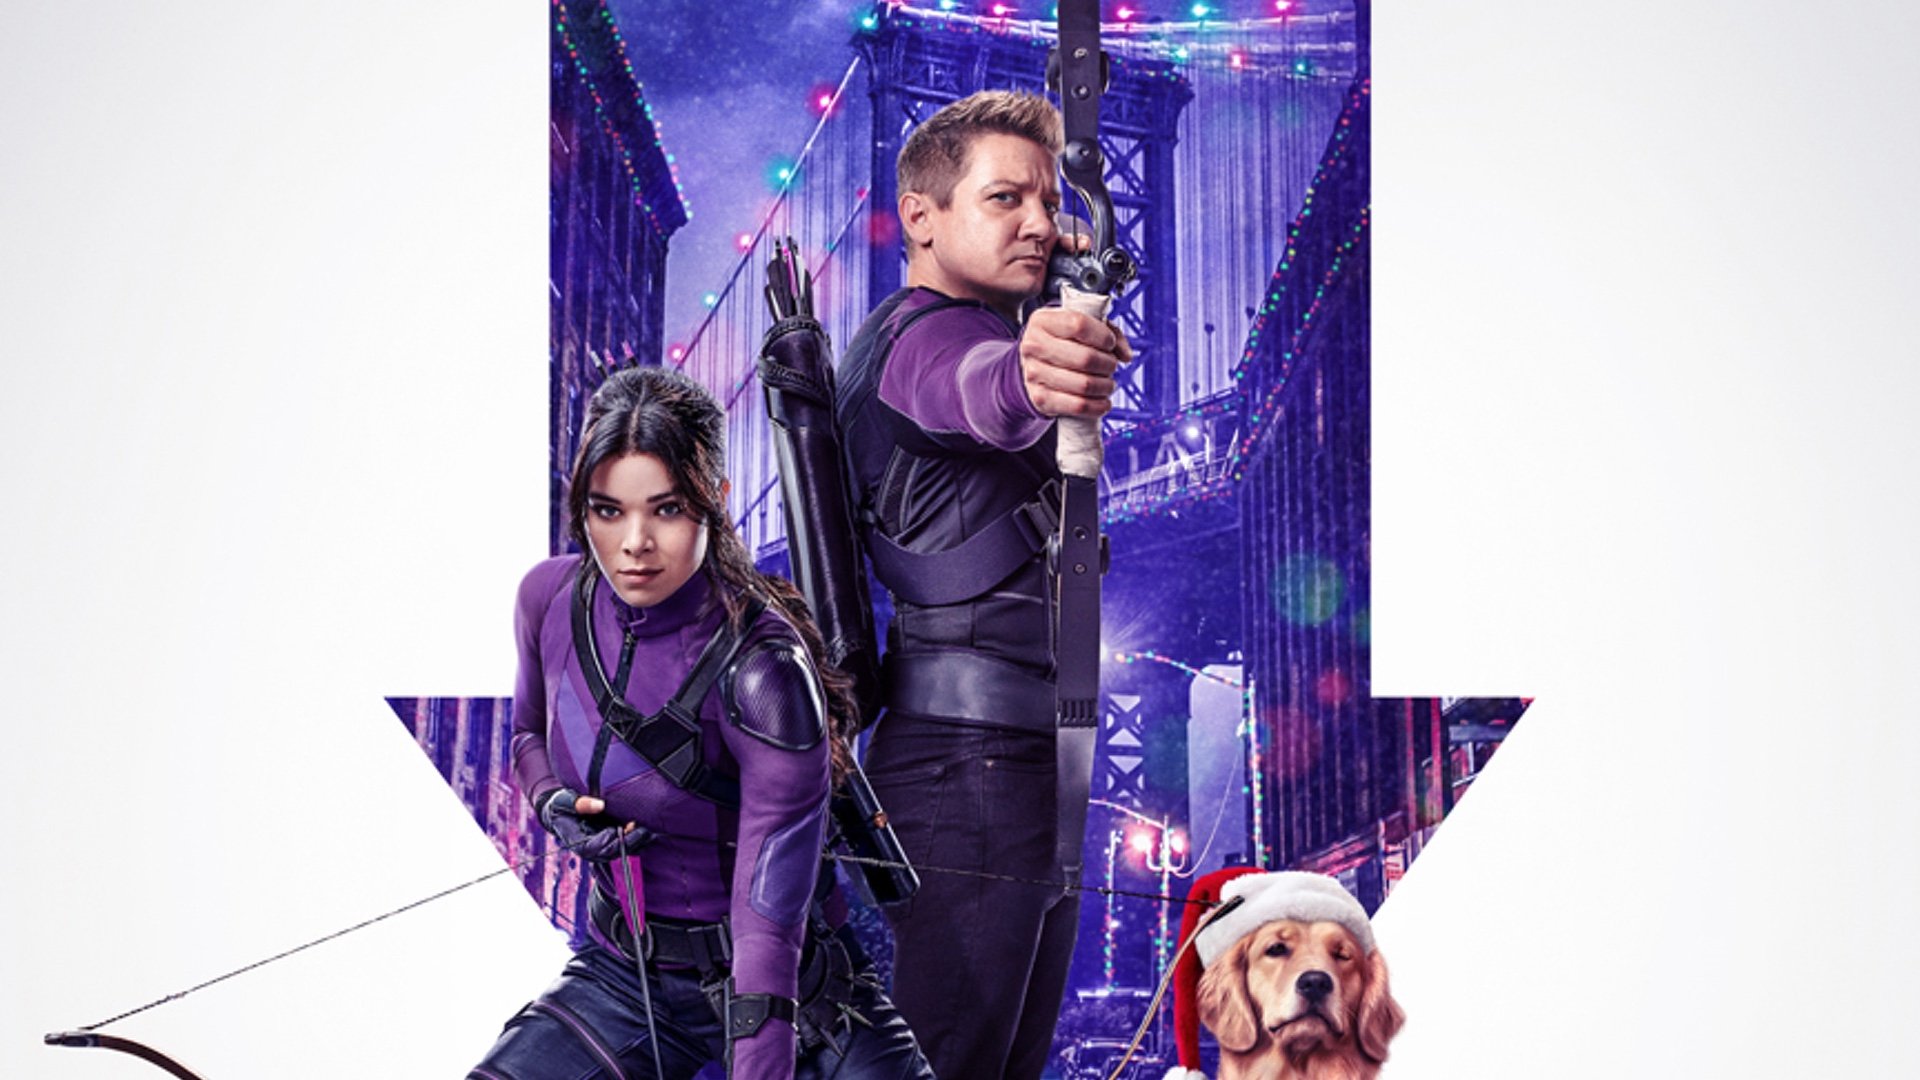 Cool Poster Art Released for Marvel's HAWKEYE Series